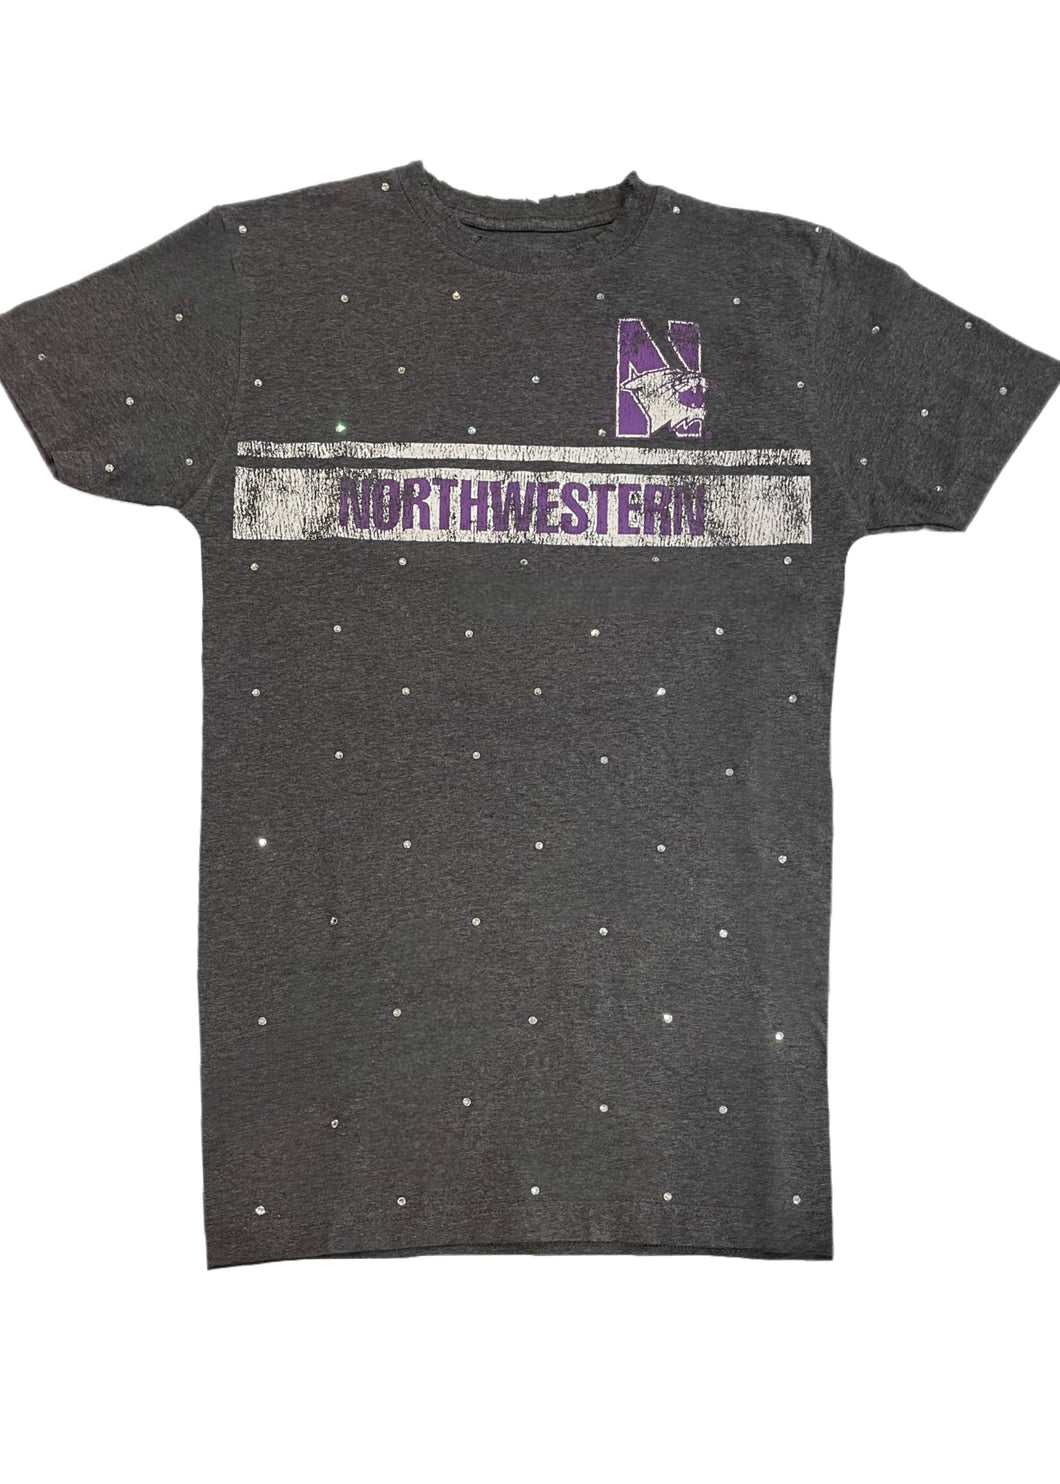 Northwestern University, One of a KIND Vintage Wildcats Tee Shirt with All Over Crystals Design